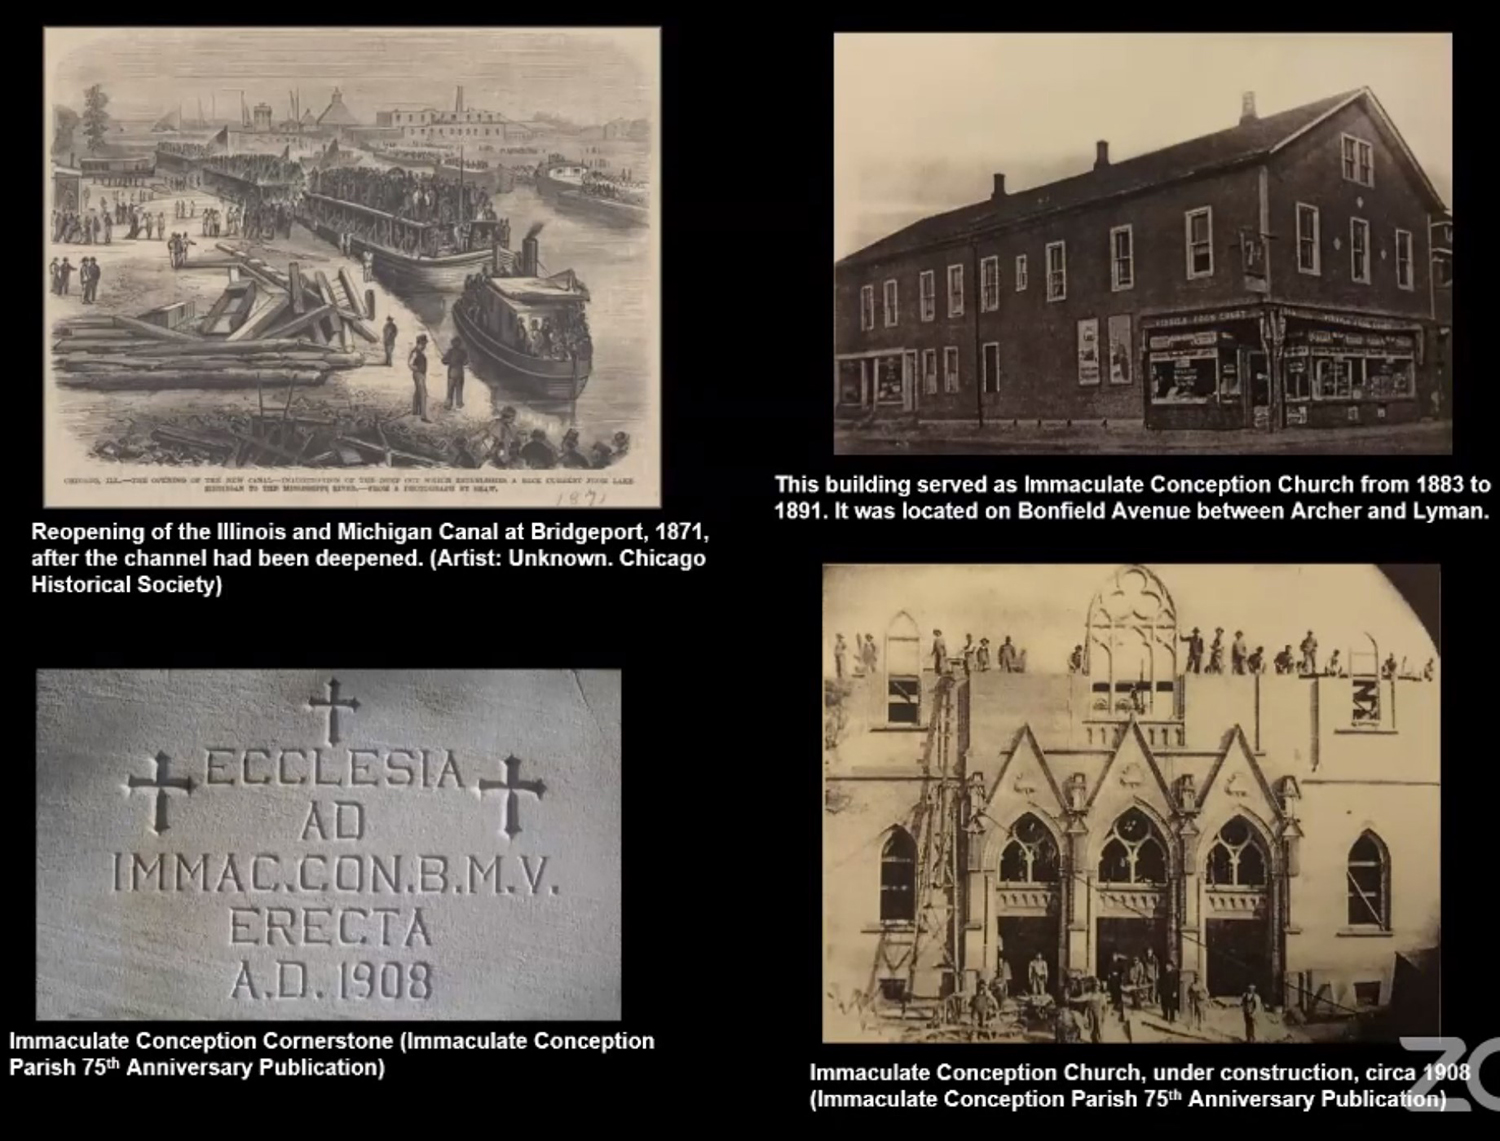 Historic Images of Immaculate Conception Church (now Monastery of the Holy Cross). Images by CCL